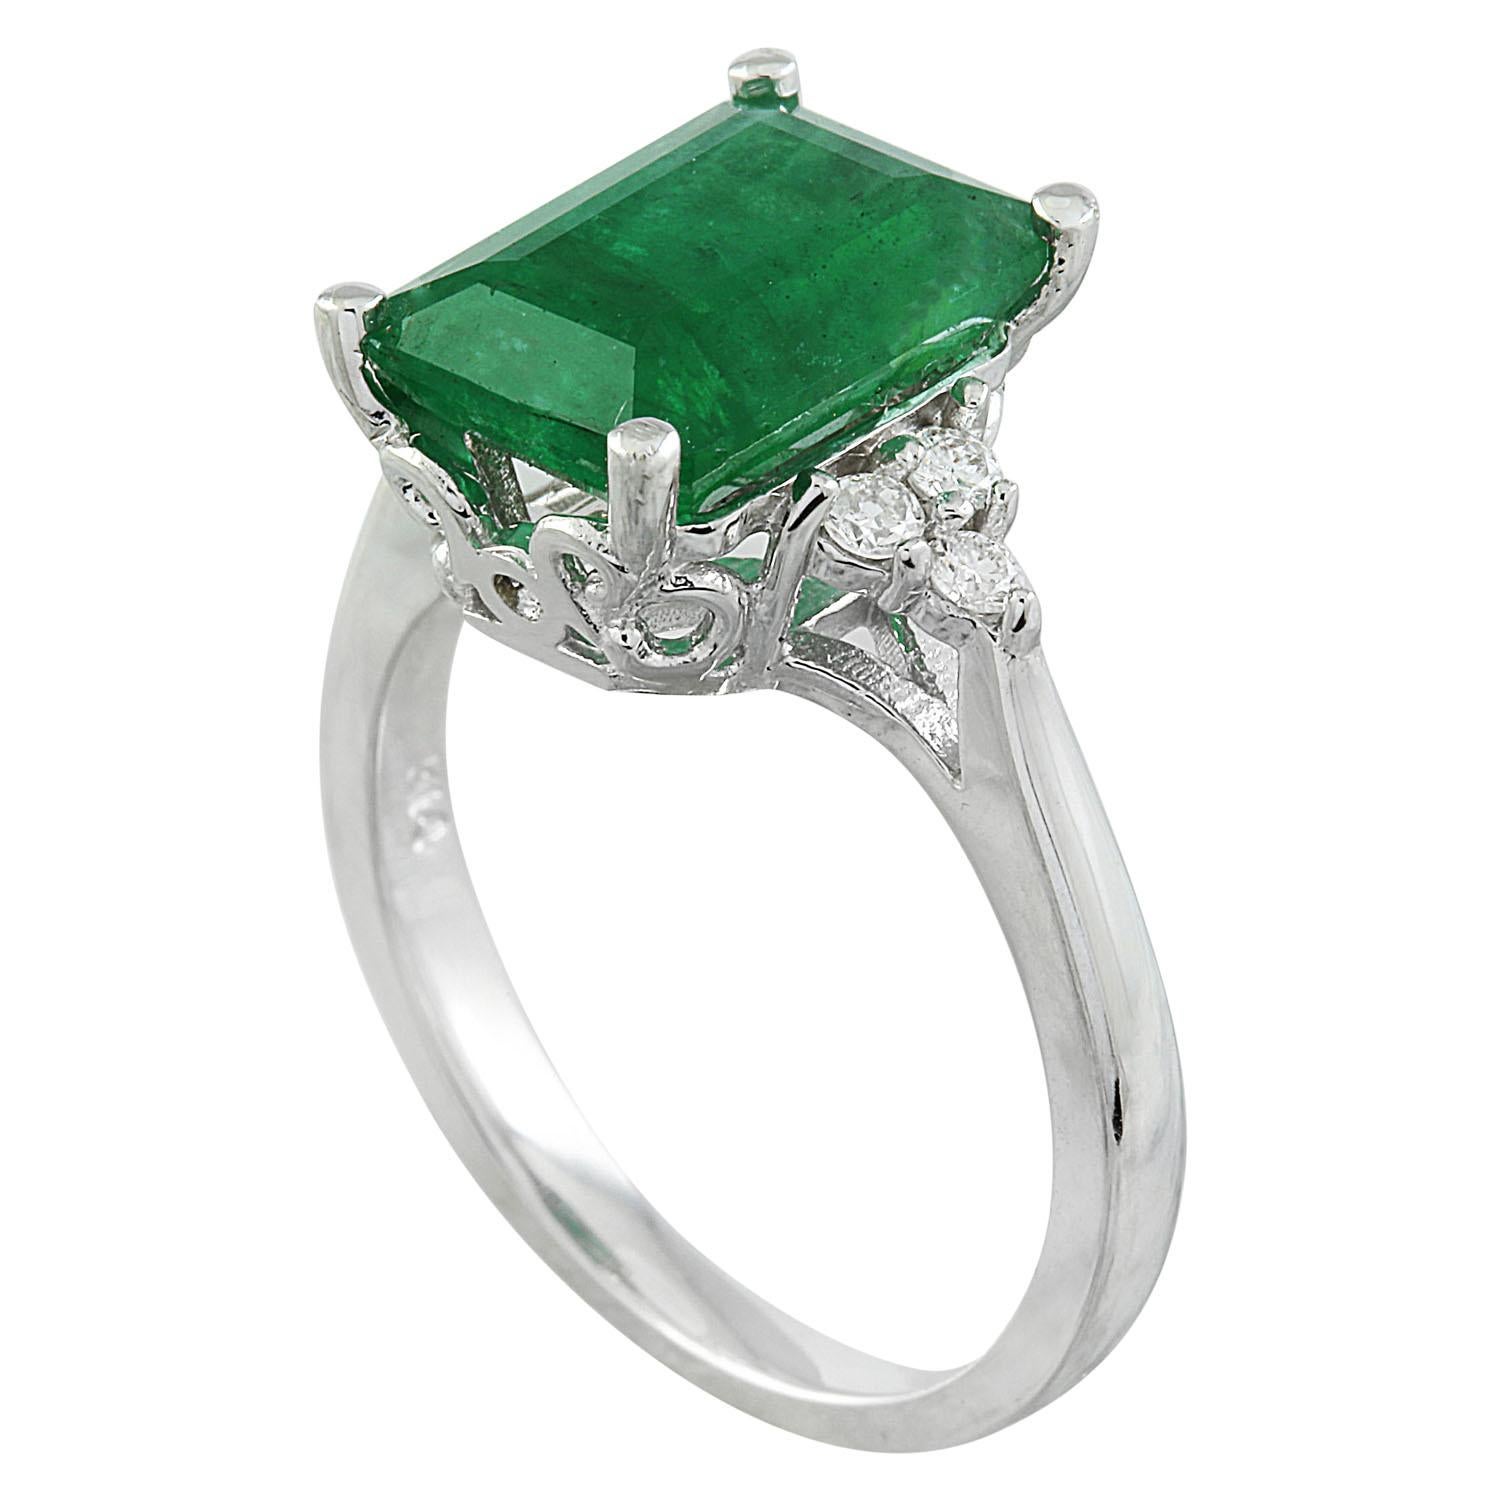 3.55 Carat Natural Emerald 14 Karat Solid White Gold Diamond Ring
Stamped: 14K 
Total Ring Weight: 4 Grams 
Emerald Weight 3.40 Carat (11.00x9.00 Millimeters)
Treatment: Oiling
Diamond Weight: 0.15 carat (F-G Color, VS2-SI1 Clarity )
Treatment: